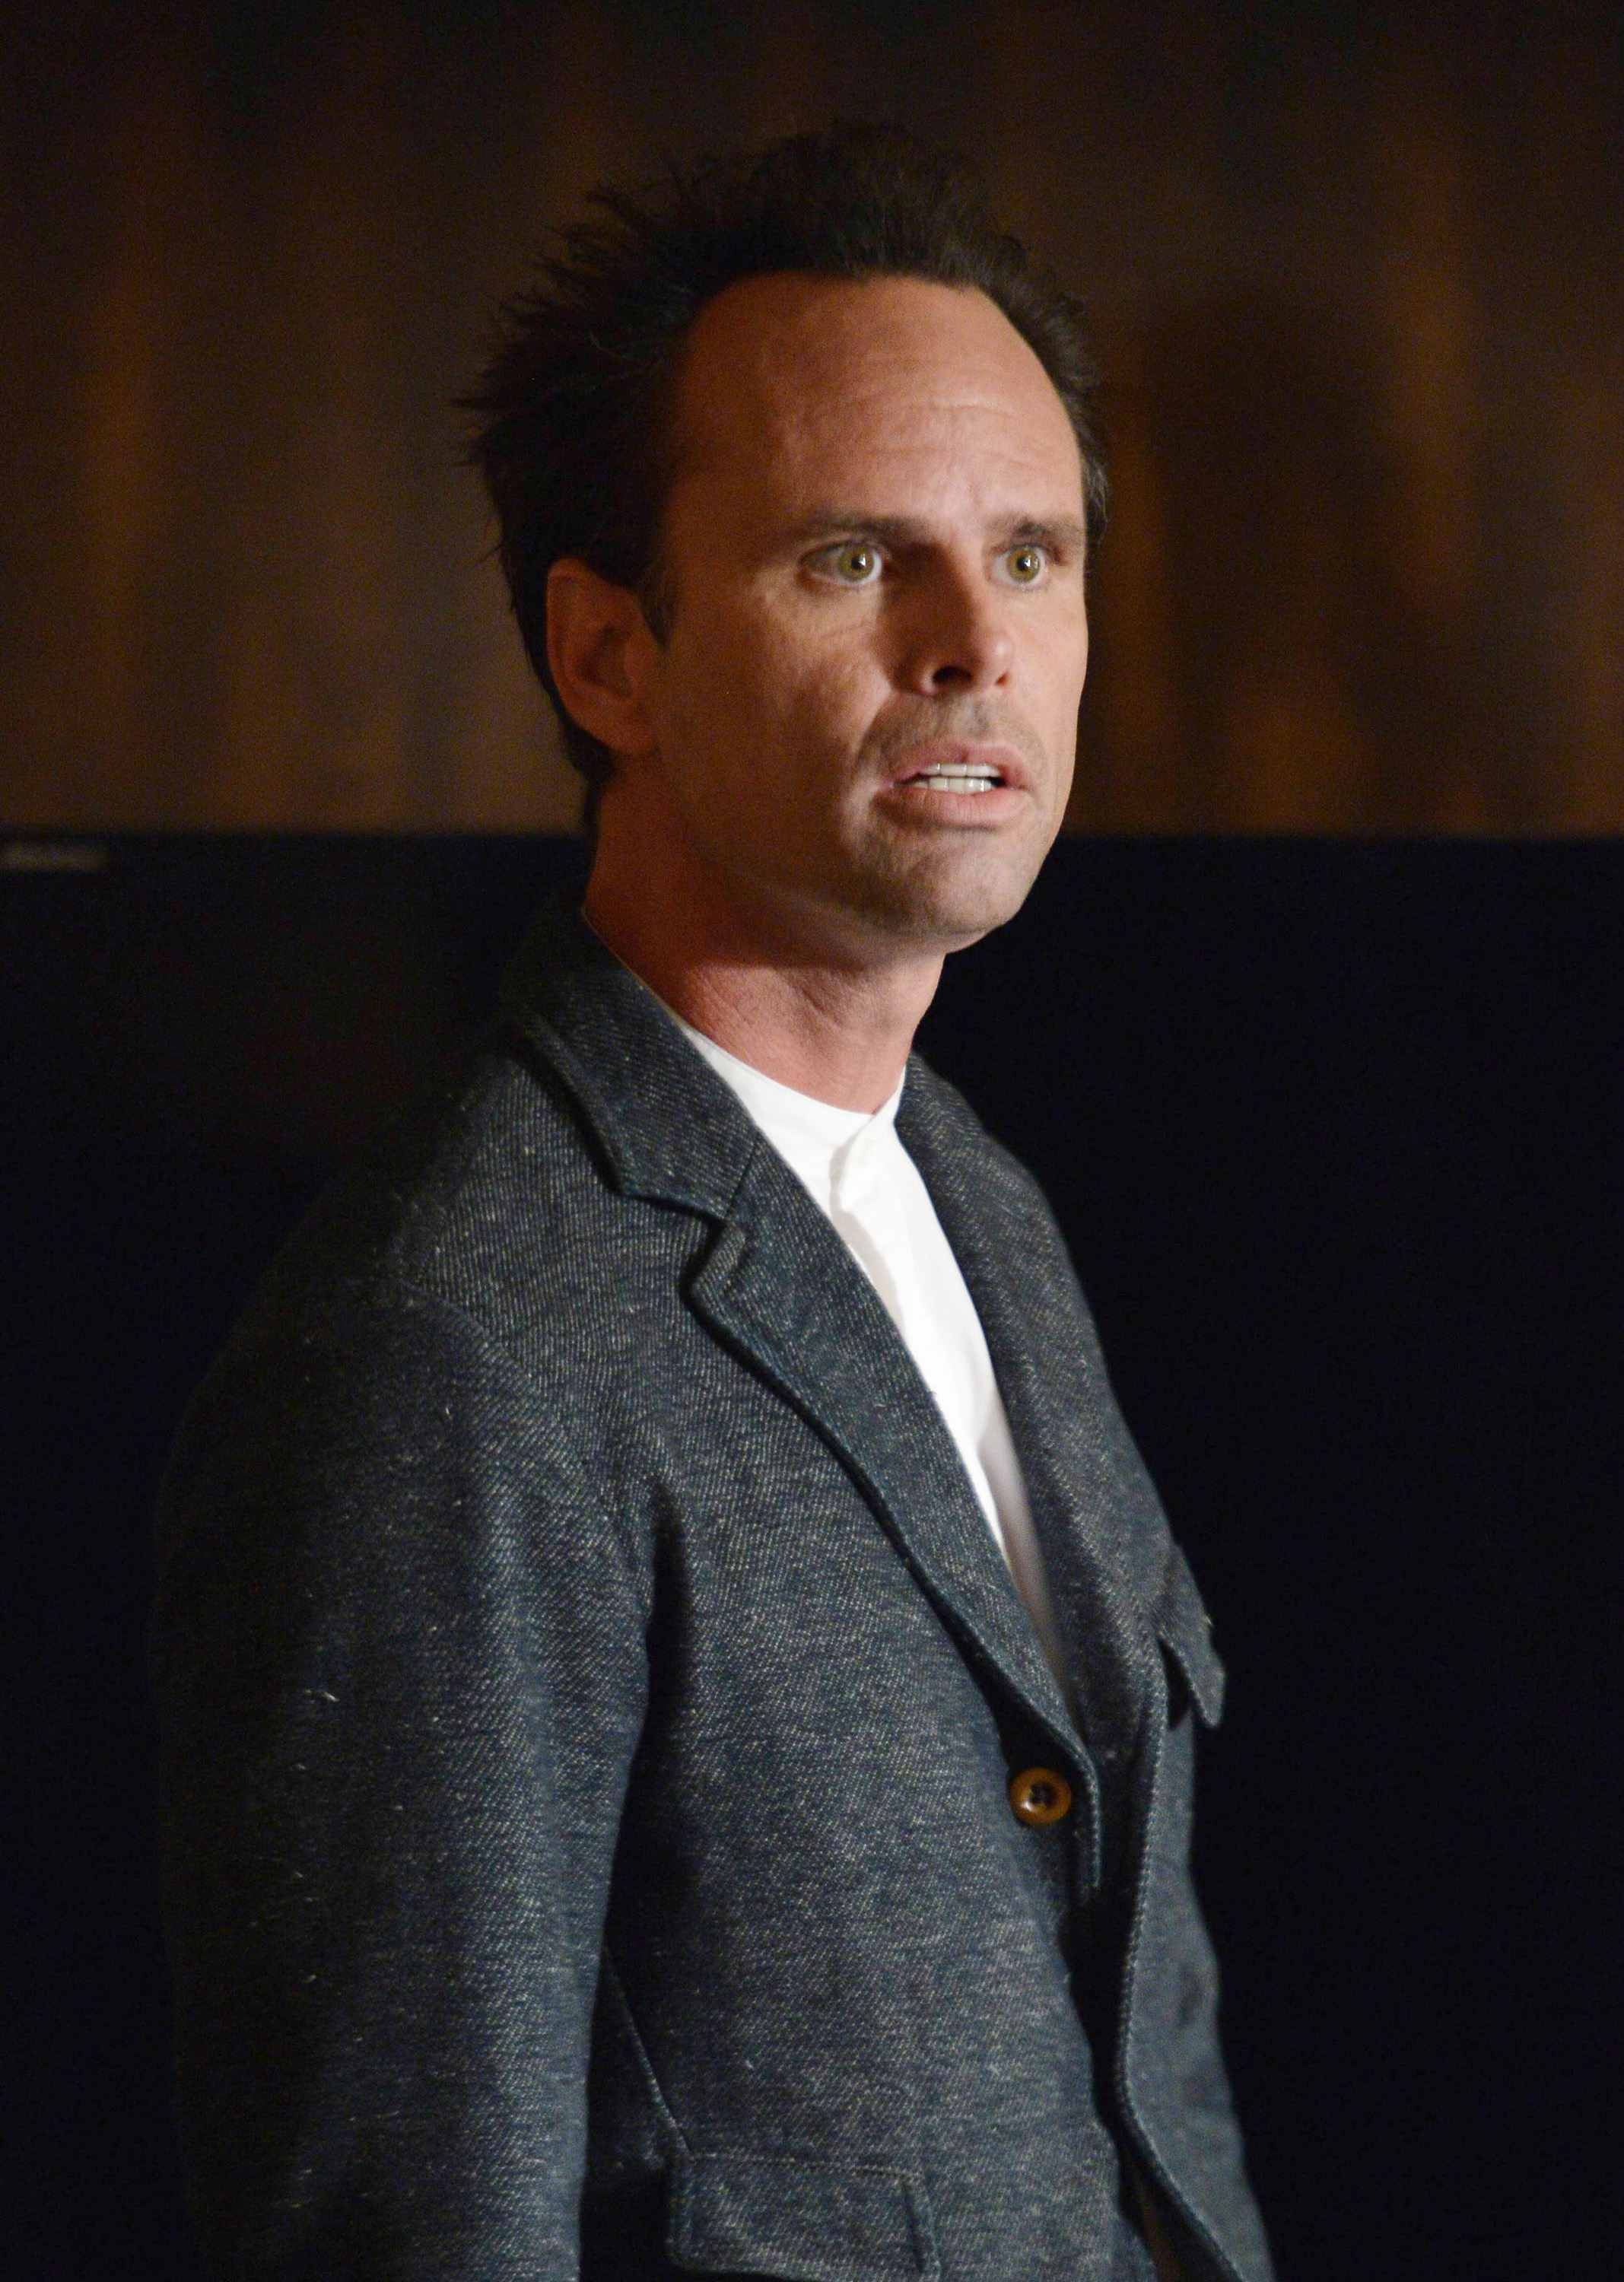 Walton Goggins standing in a suit jacket, looking to the side with an intense expression